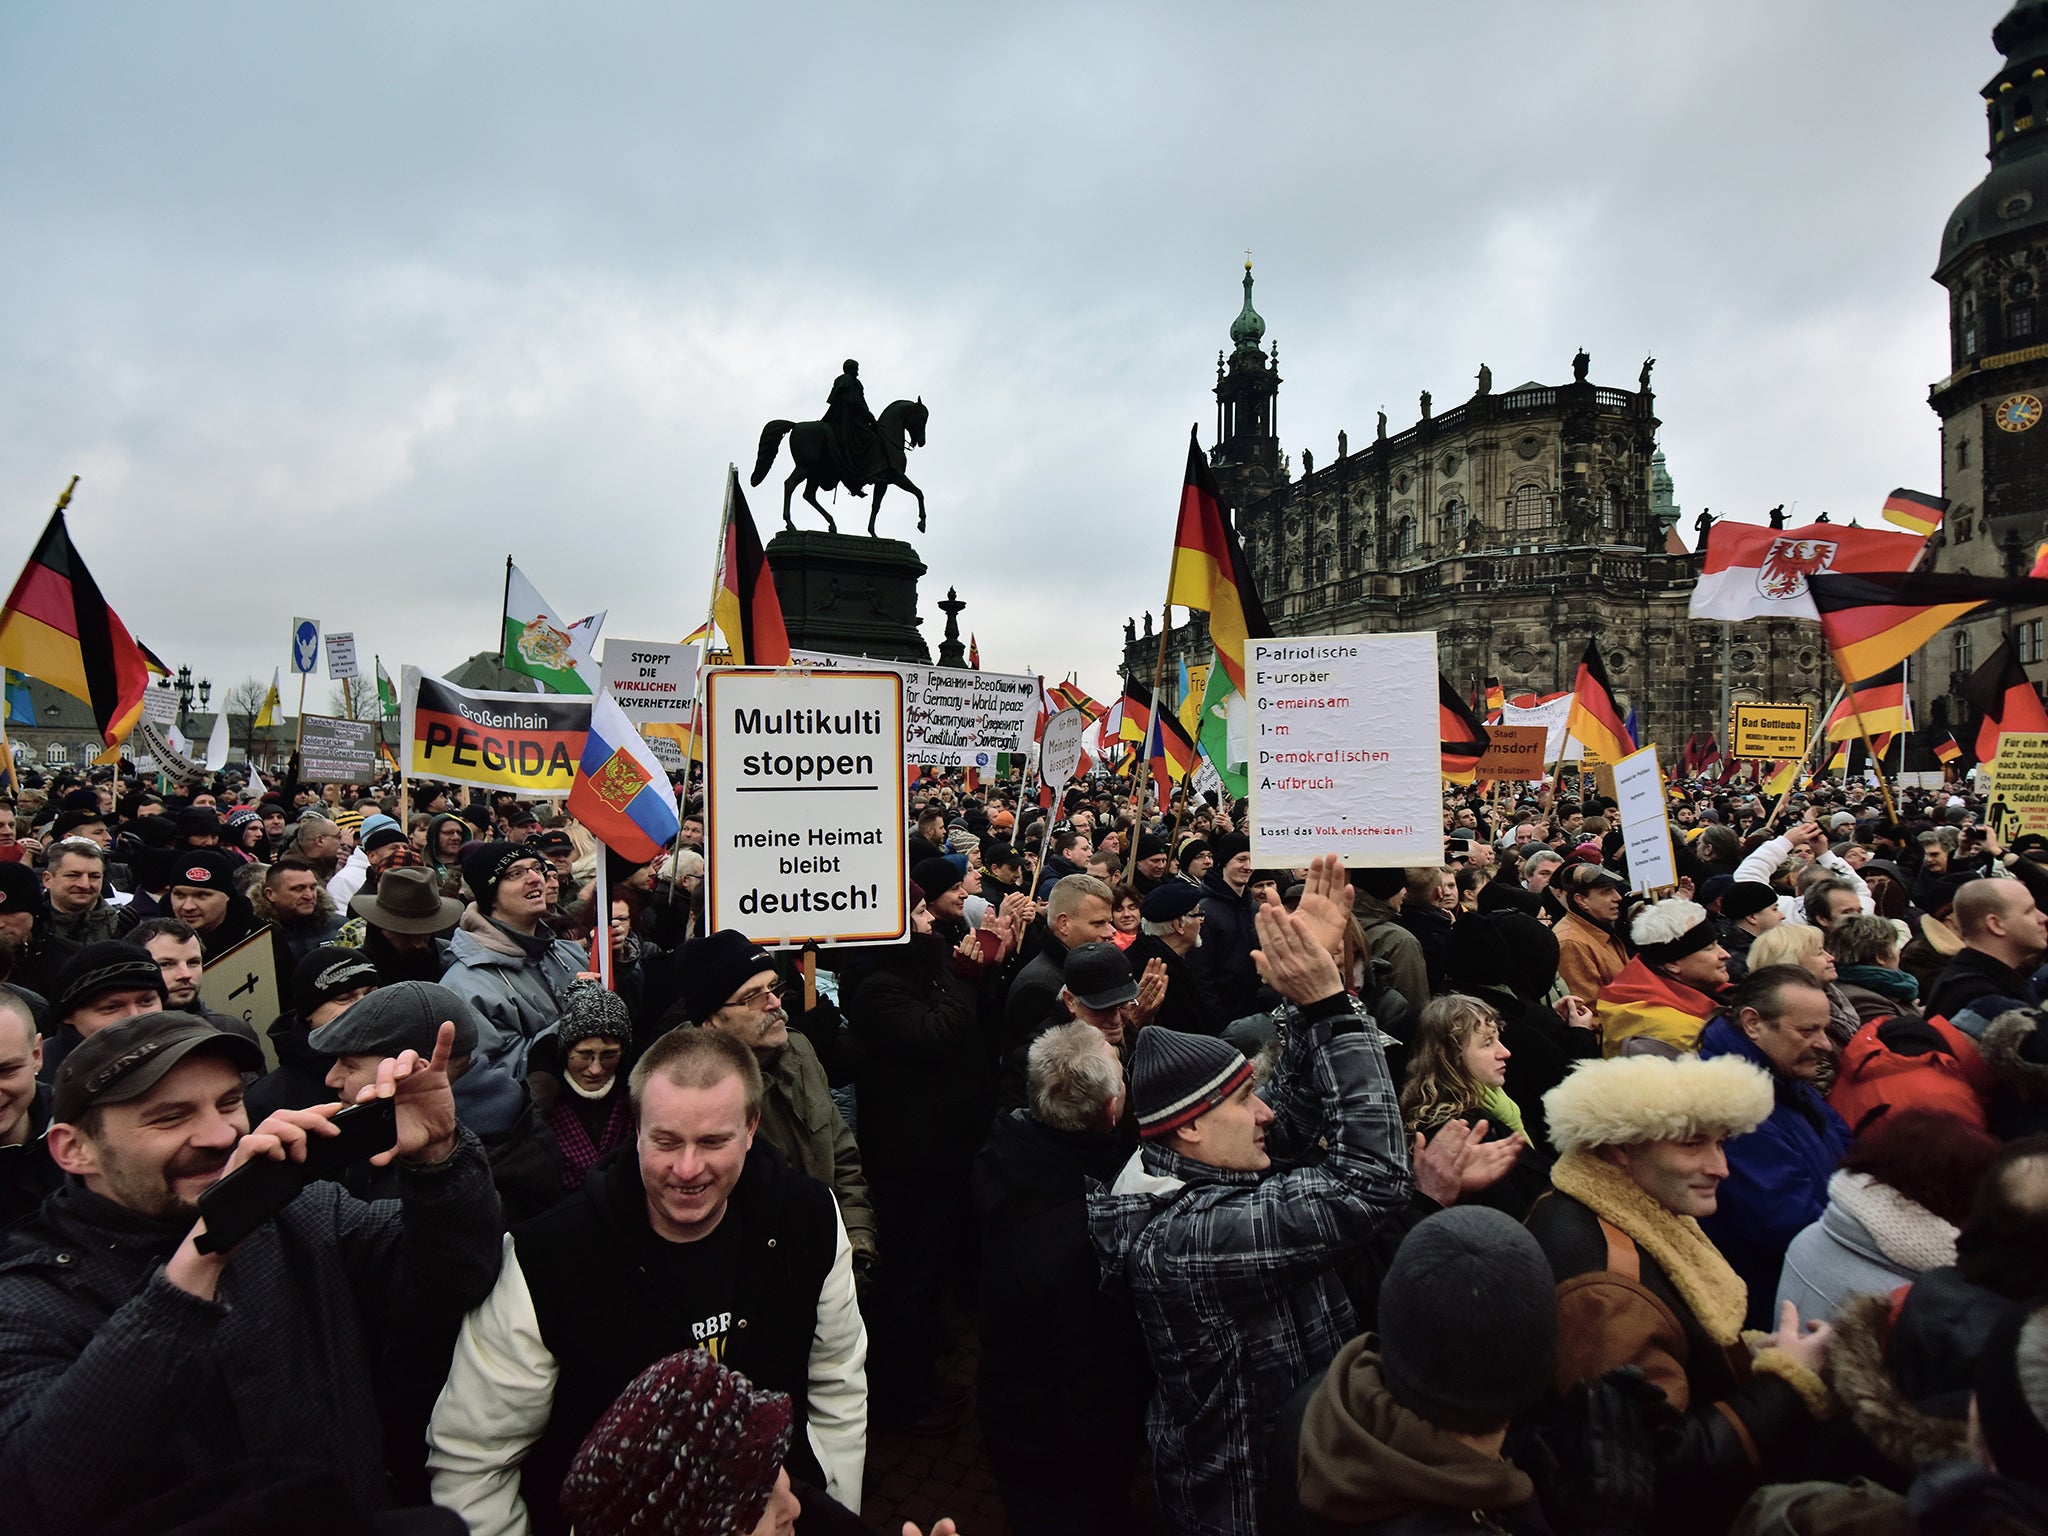 Pegida supporters’ weekly demonstration against Islamic immigrants in Dresden on Monday could be their last. The movement has attracted some neo-Nazis and football hooligans to its protests